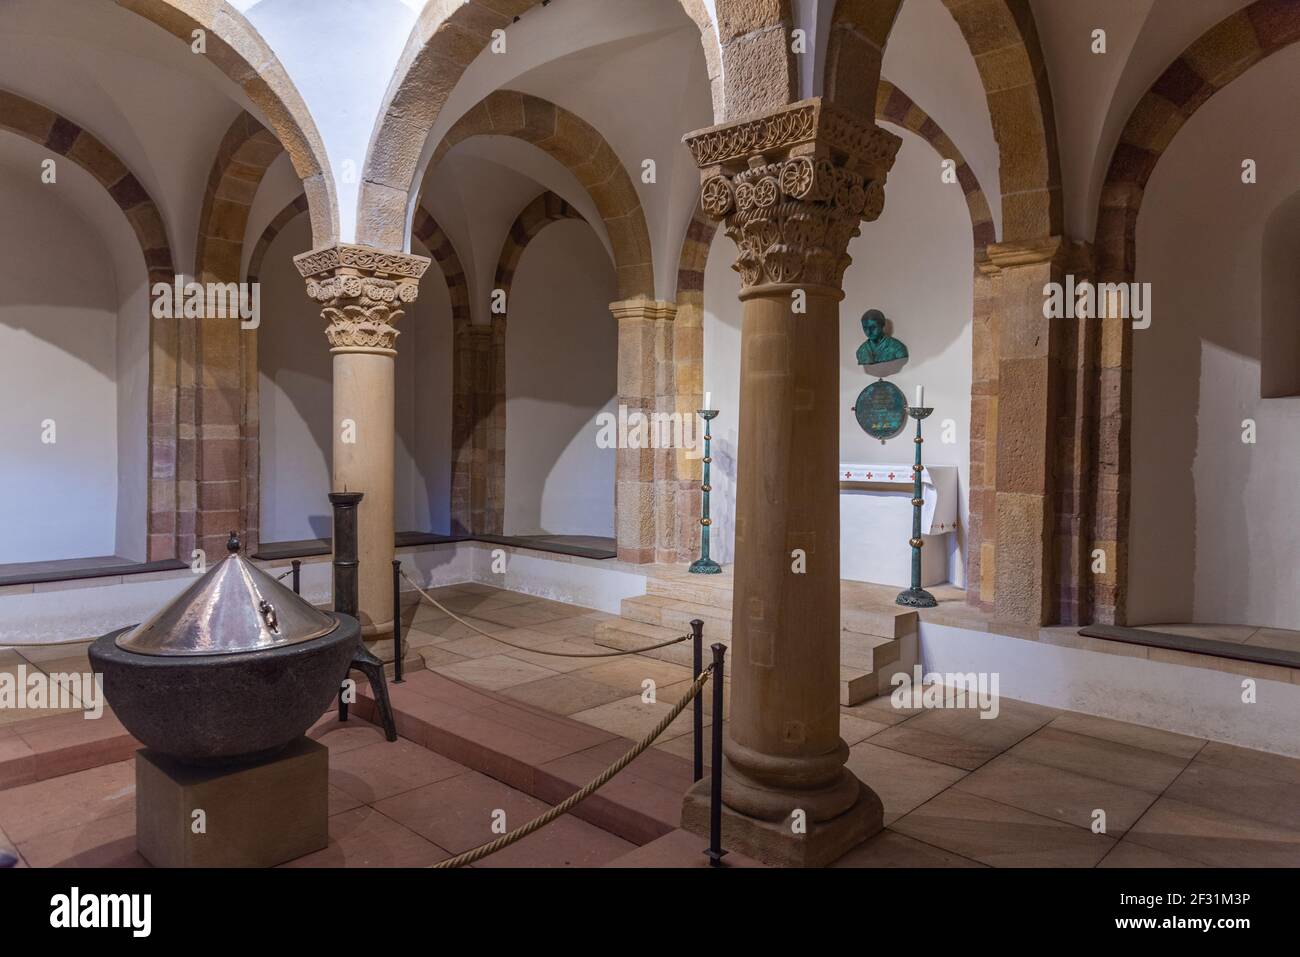 Speyer, Germany, September 16, 2020: Interior of the cathedral in Speyer, Germany Stock Photo